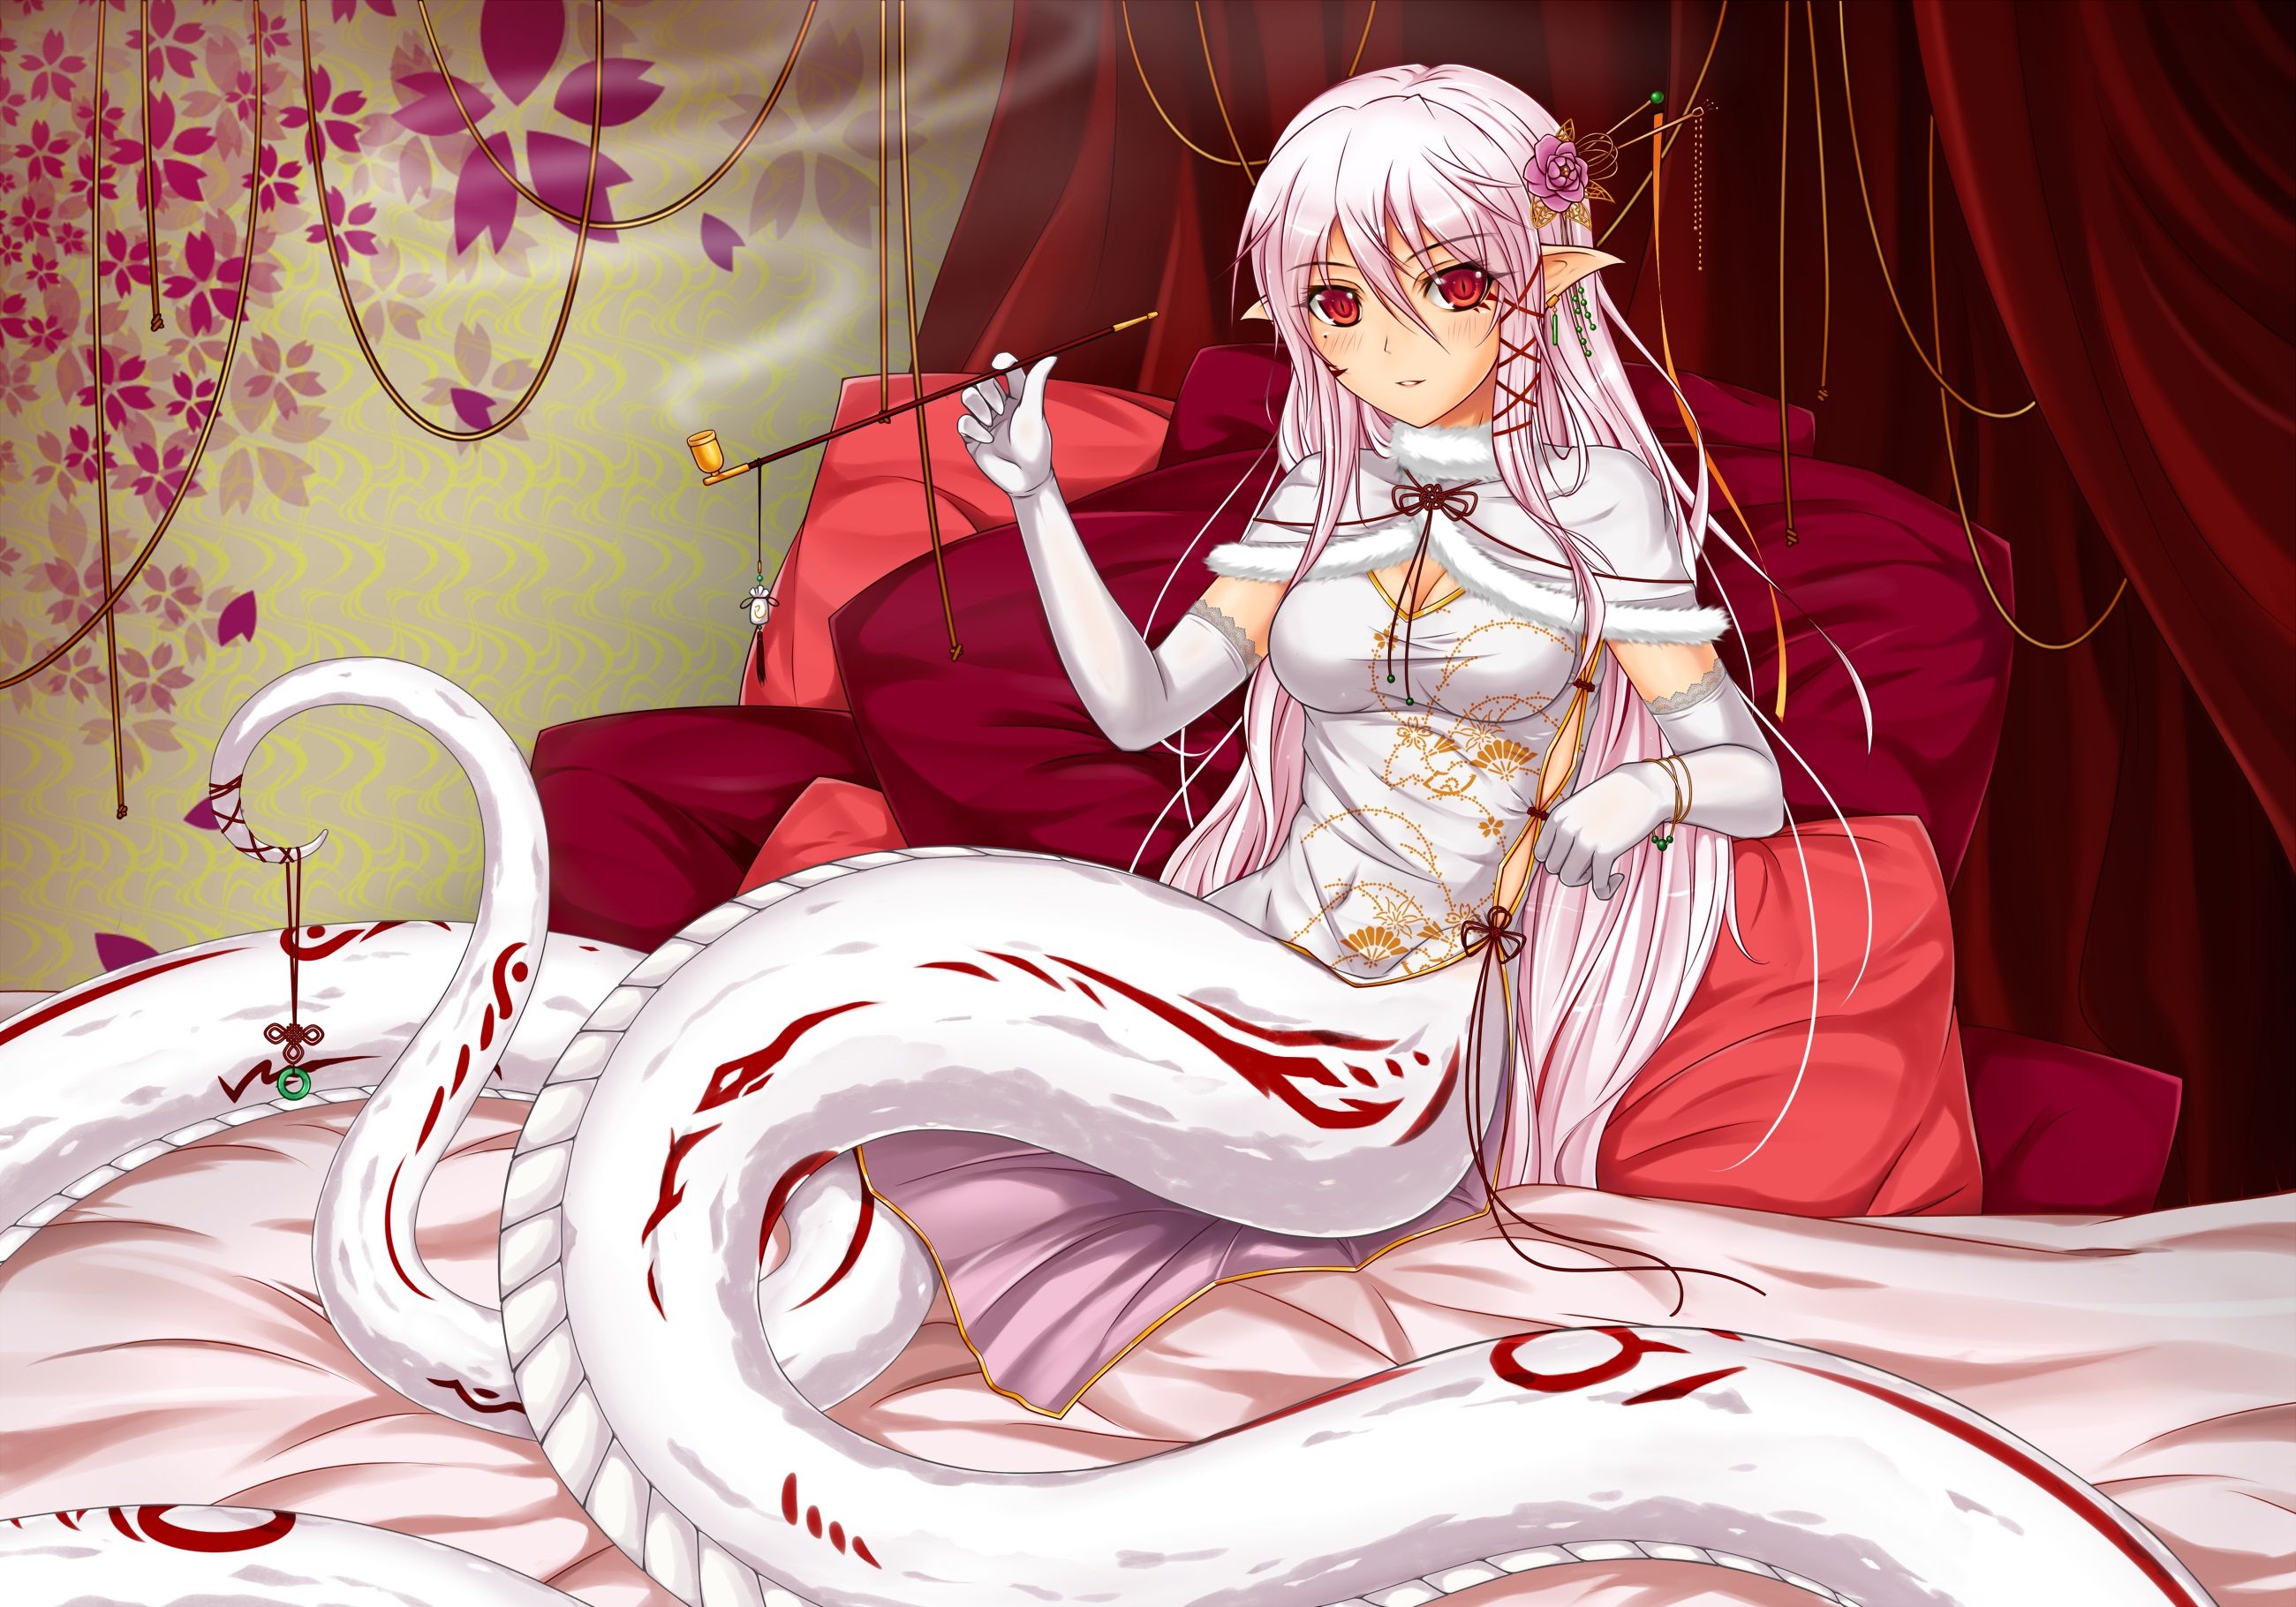 Lamia Wallpaper. Lamia Wallpaper, Wallpaper Lamia Waterhouse and Lamia Scale Guild Wallpaper